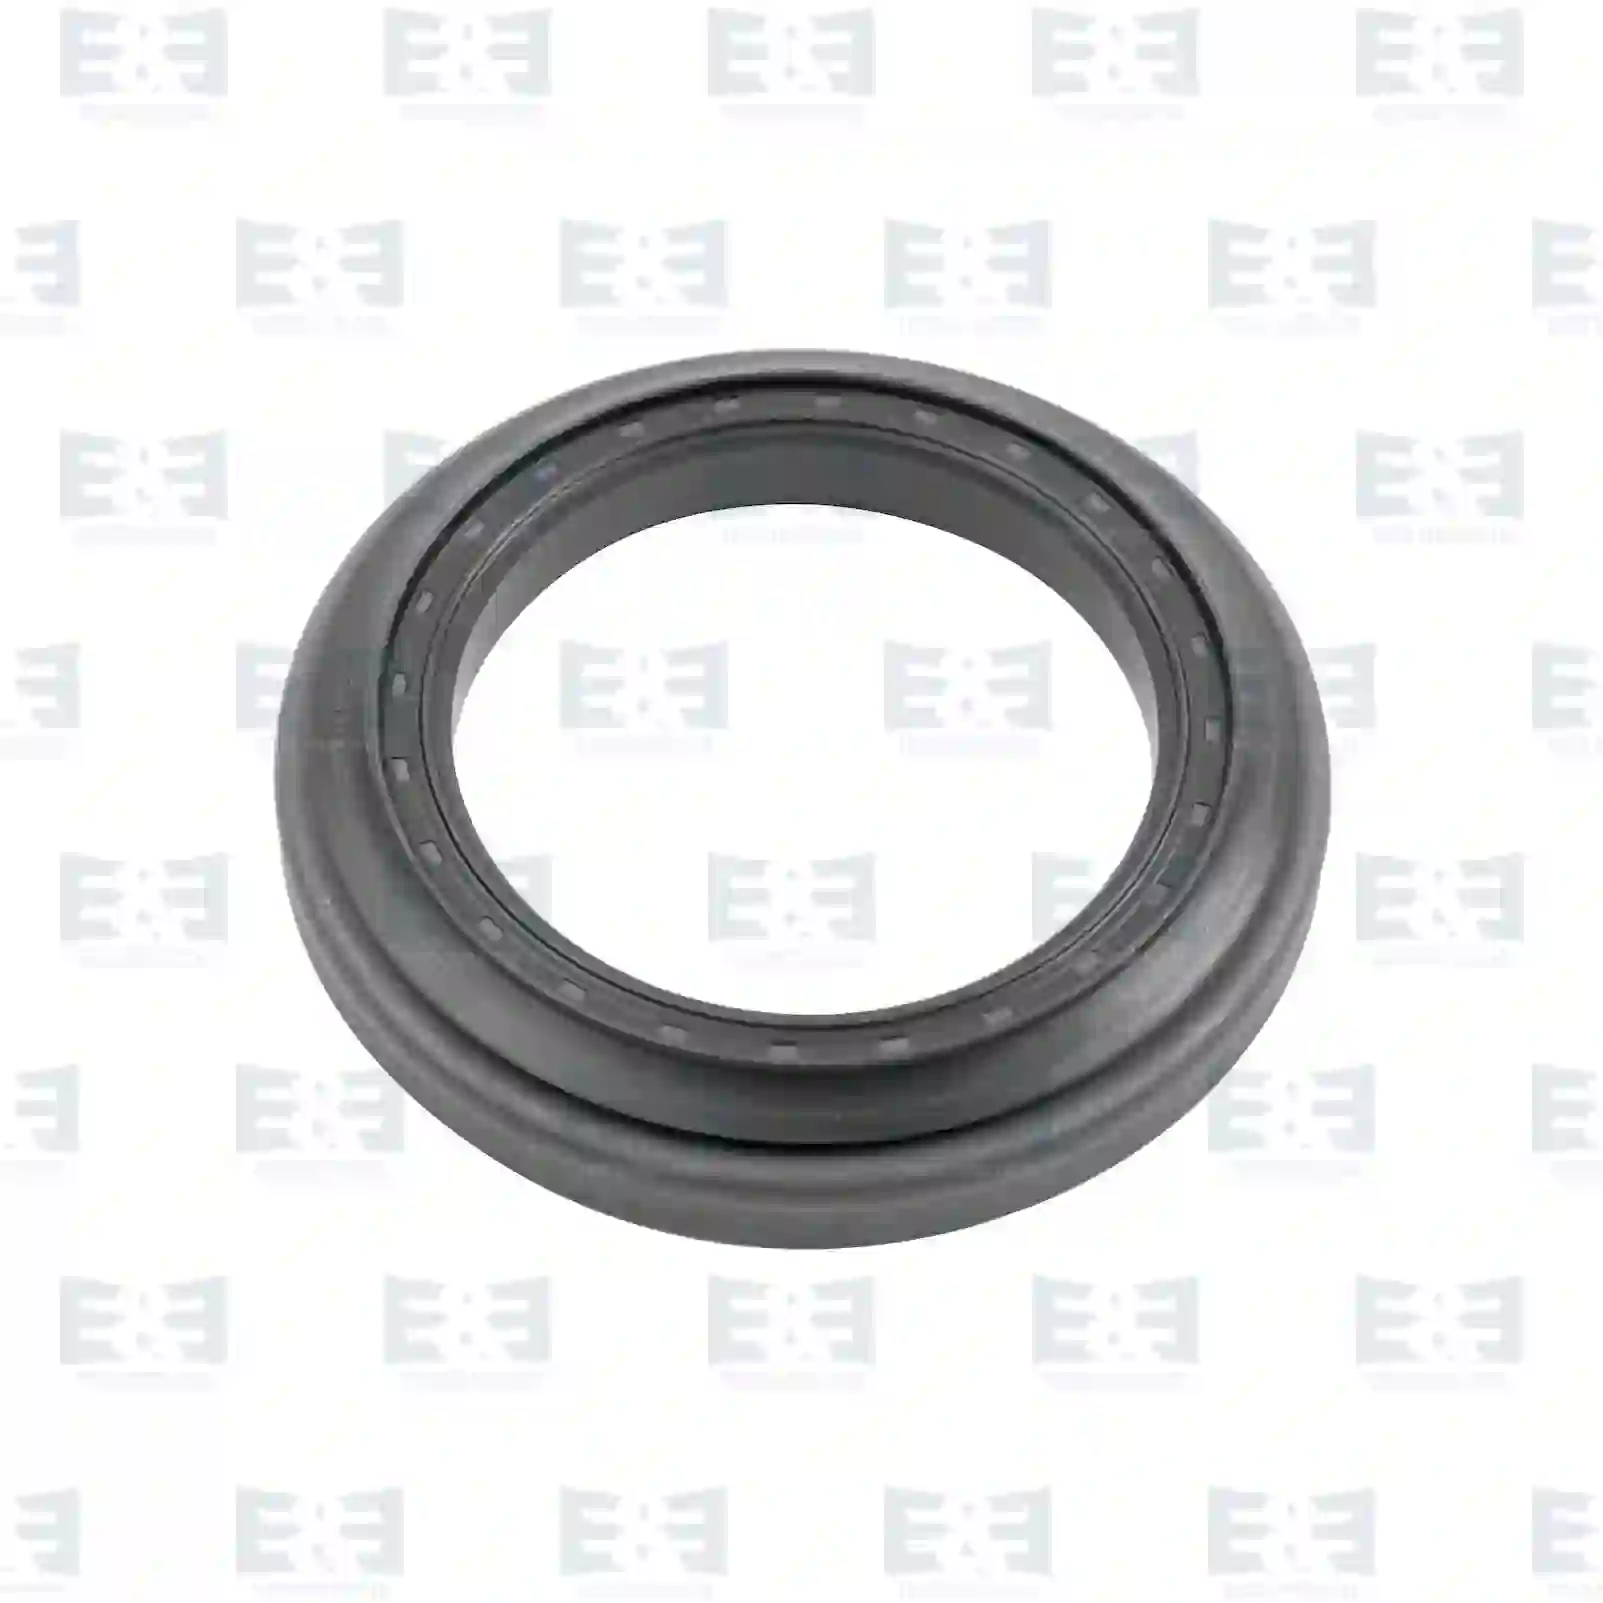 Steering Knuckle Seal ring, EE No 2E2279945 ,  oem no:7420467758, 20466812, 20467758, ZG41503-0008 E&E Truck Spare Parts | Truck Spare Parts, Auotomotive Spare Parts